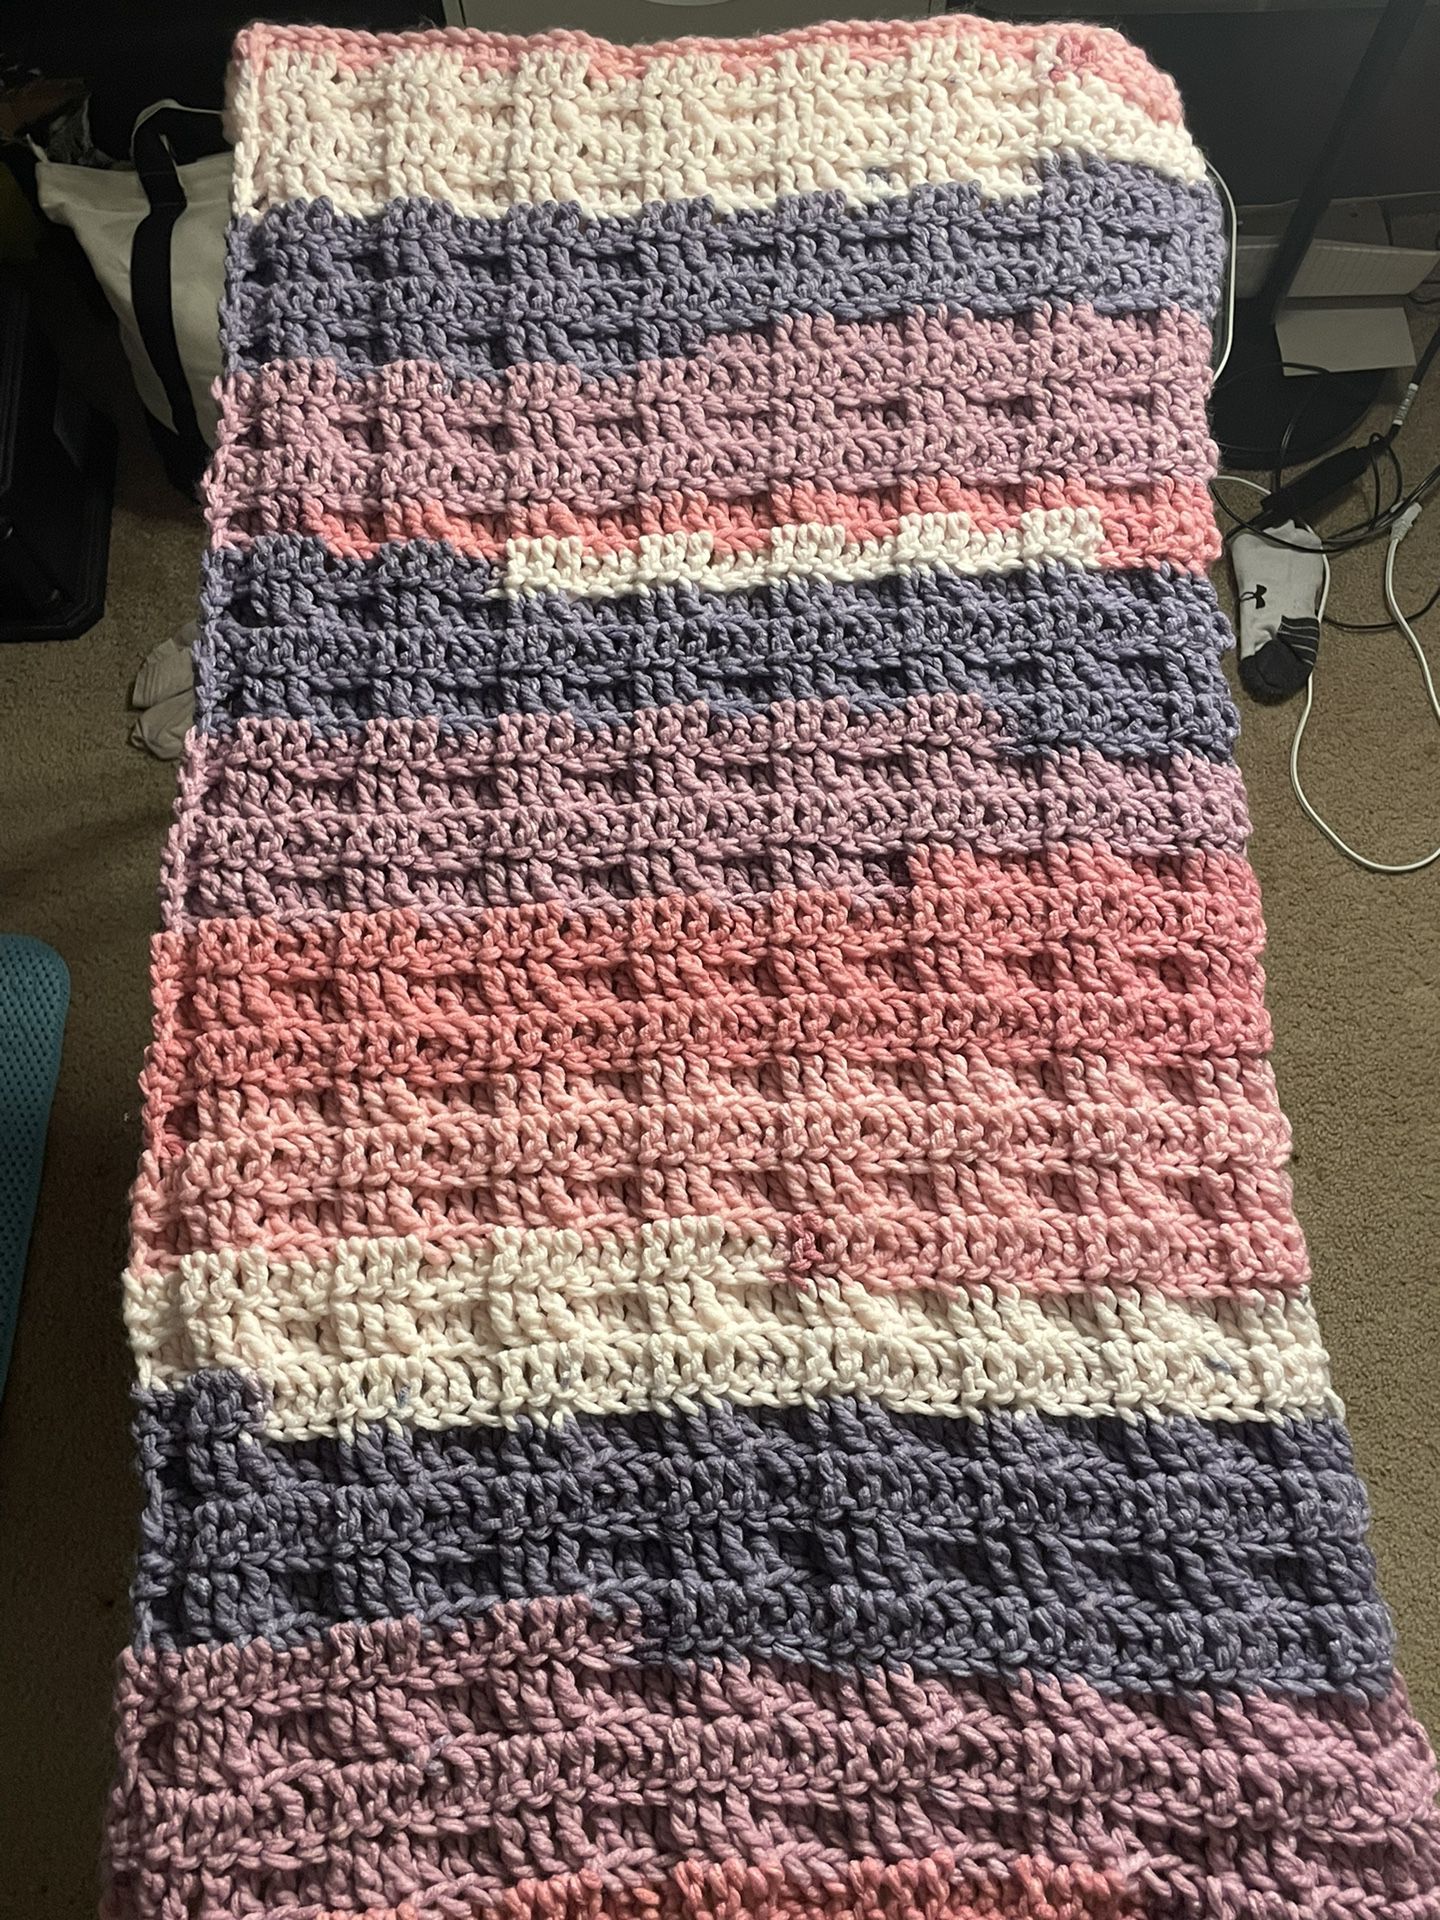 Small Blanket 